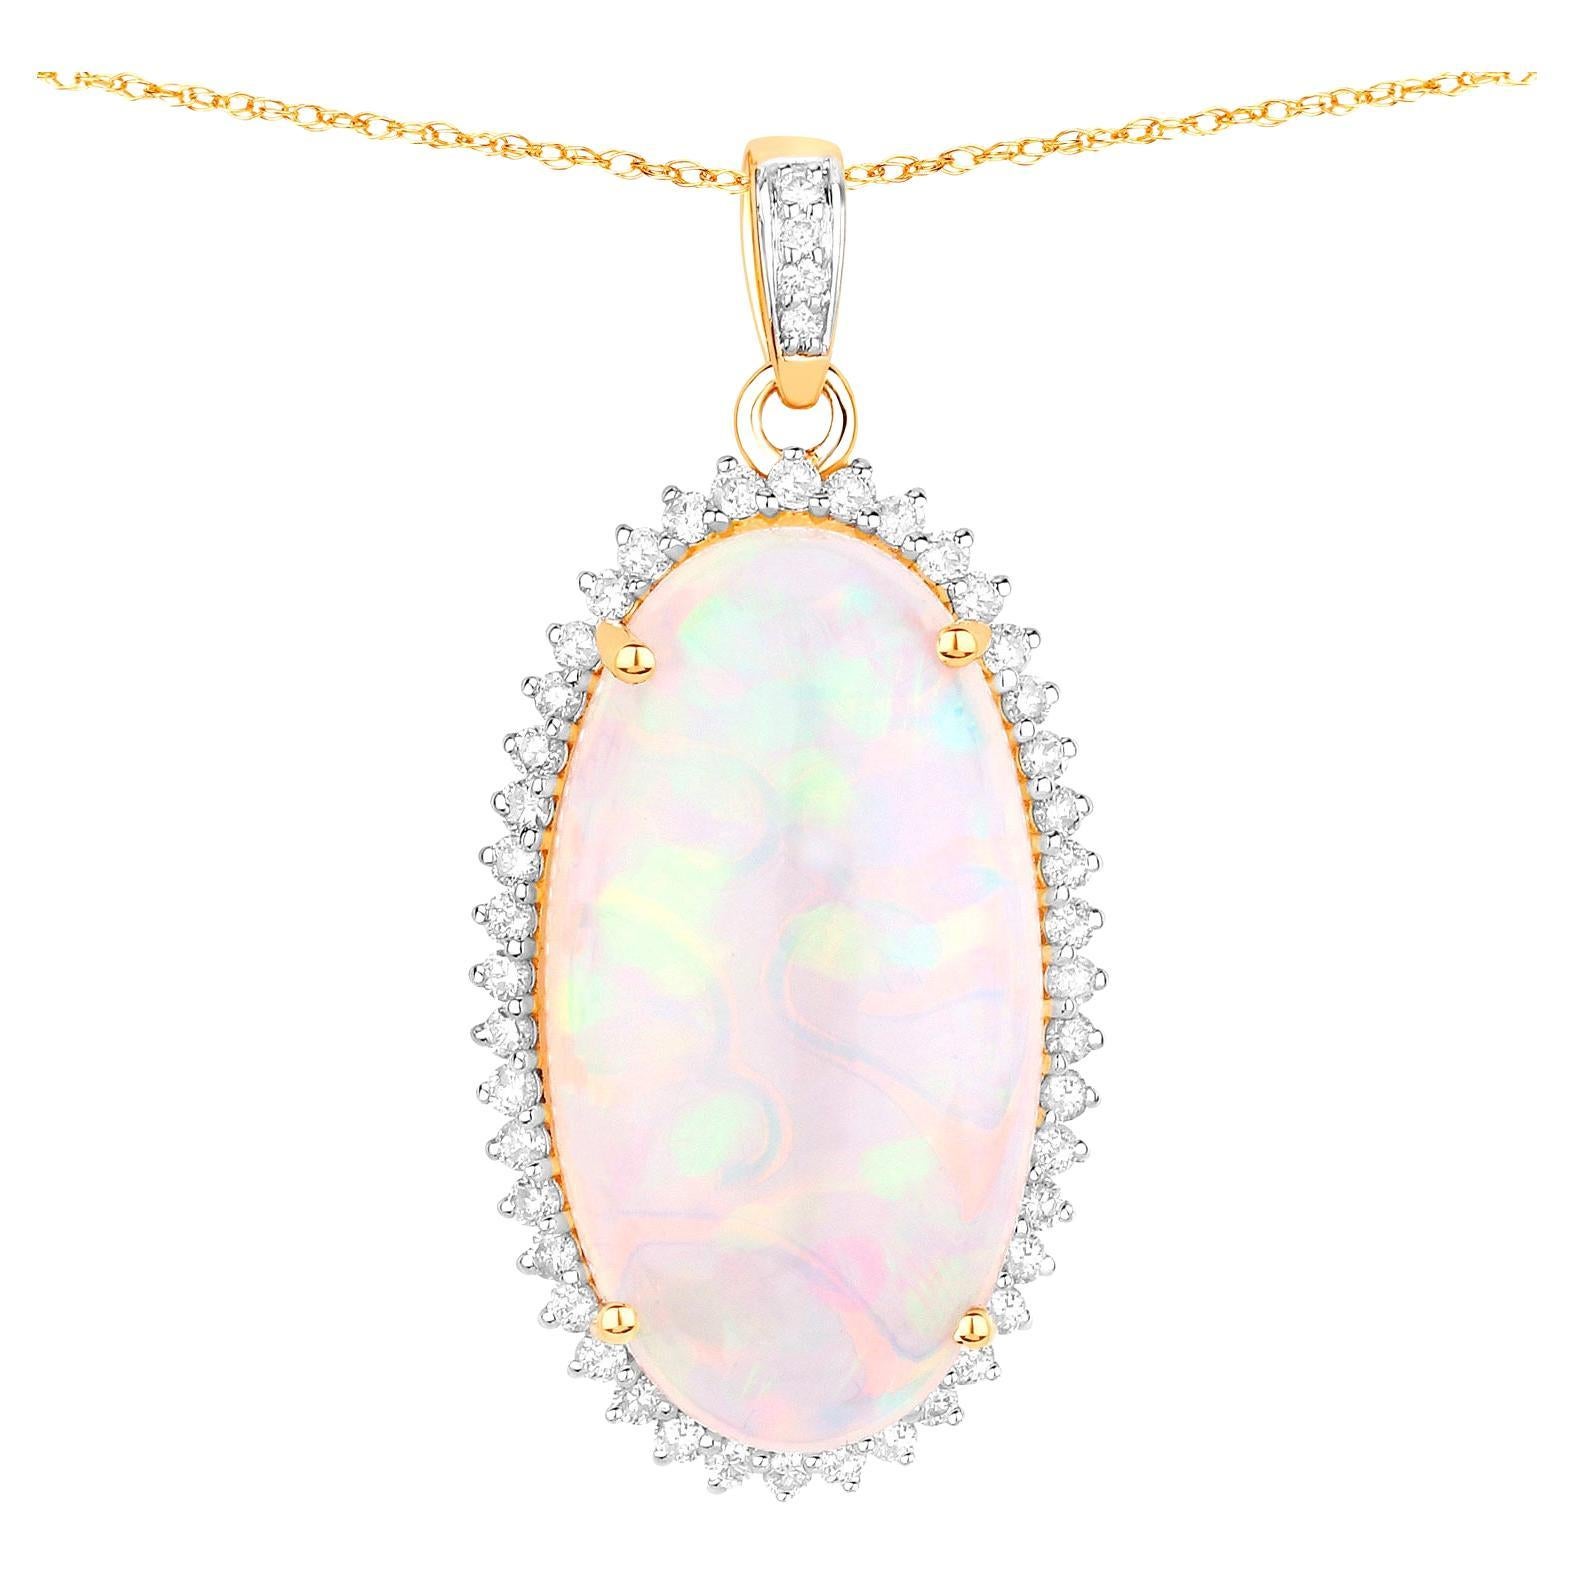 Natural Opal Pendant Necklace Diamond Setting  11.68 Carats 14K Yellow Gold For Sale